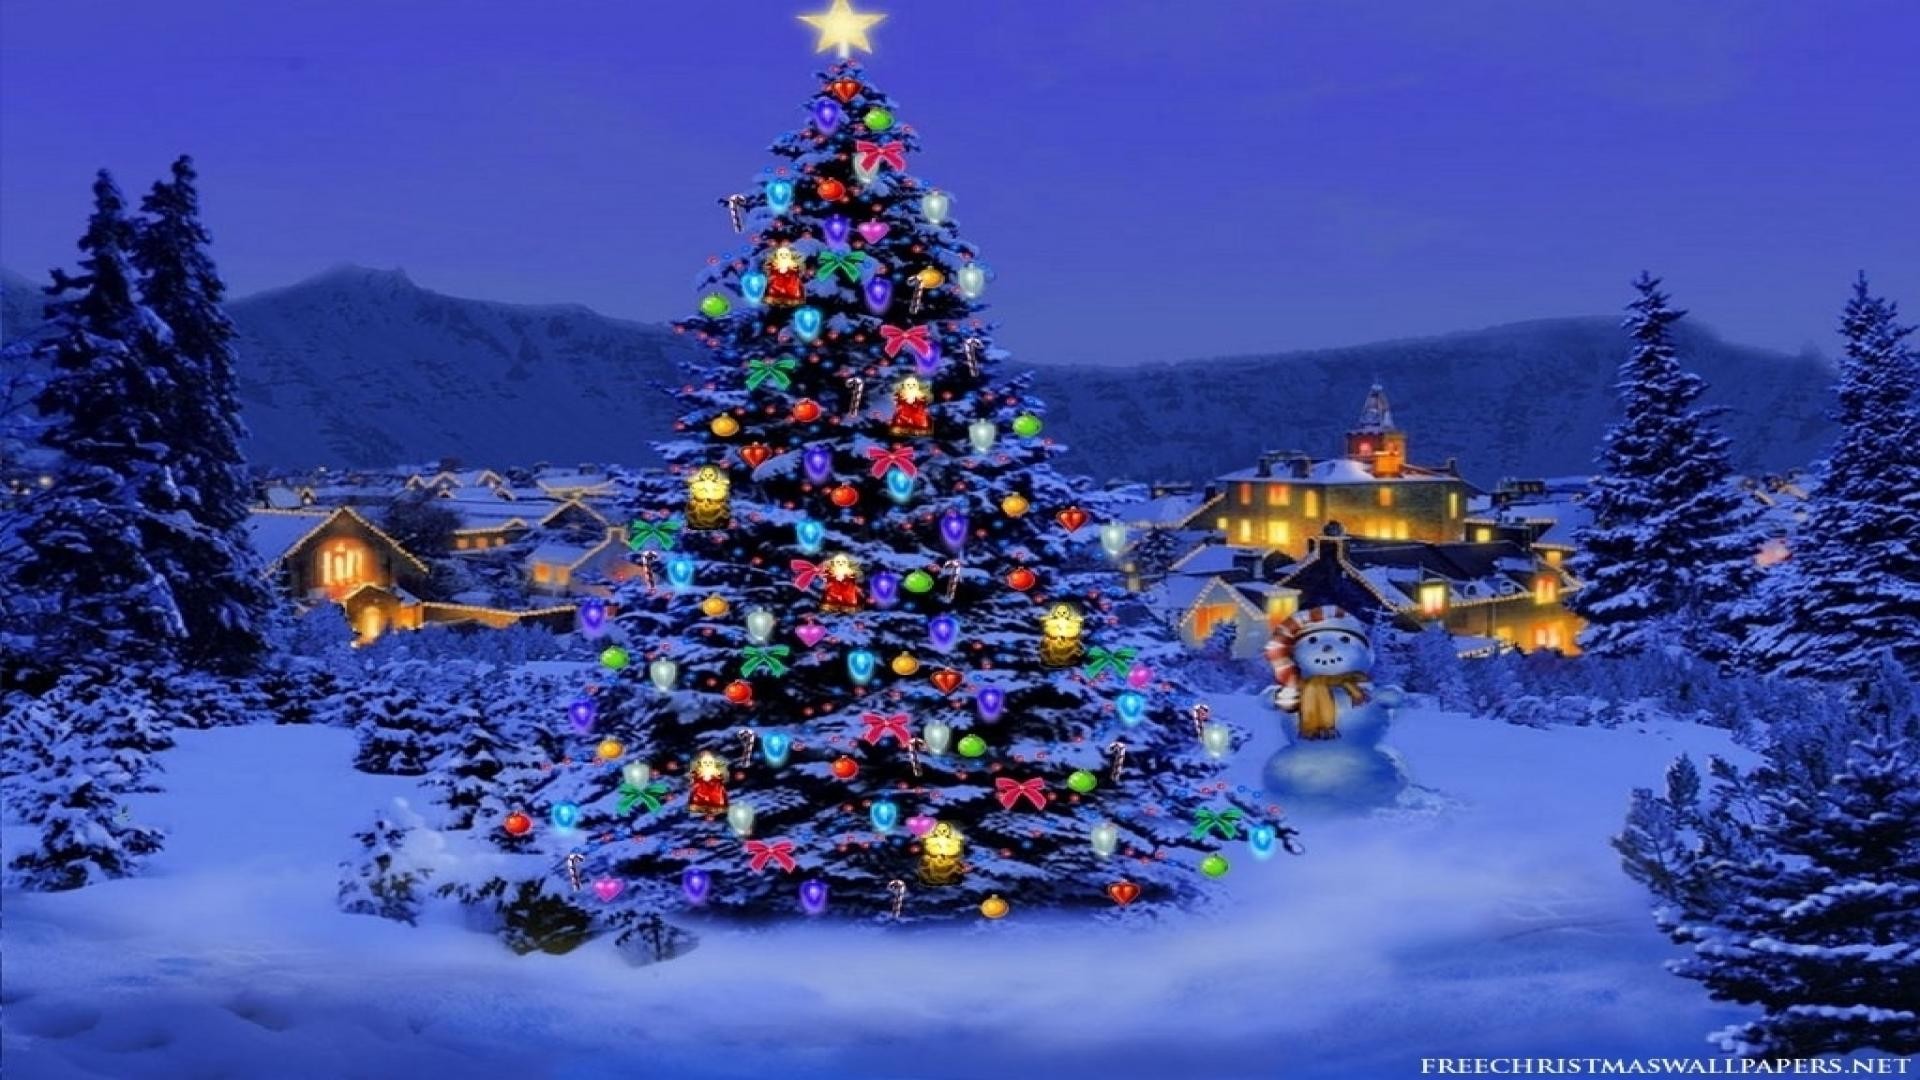 Christmas Wallpapers for Desktop 1920x1080 (64+ images)